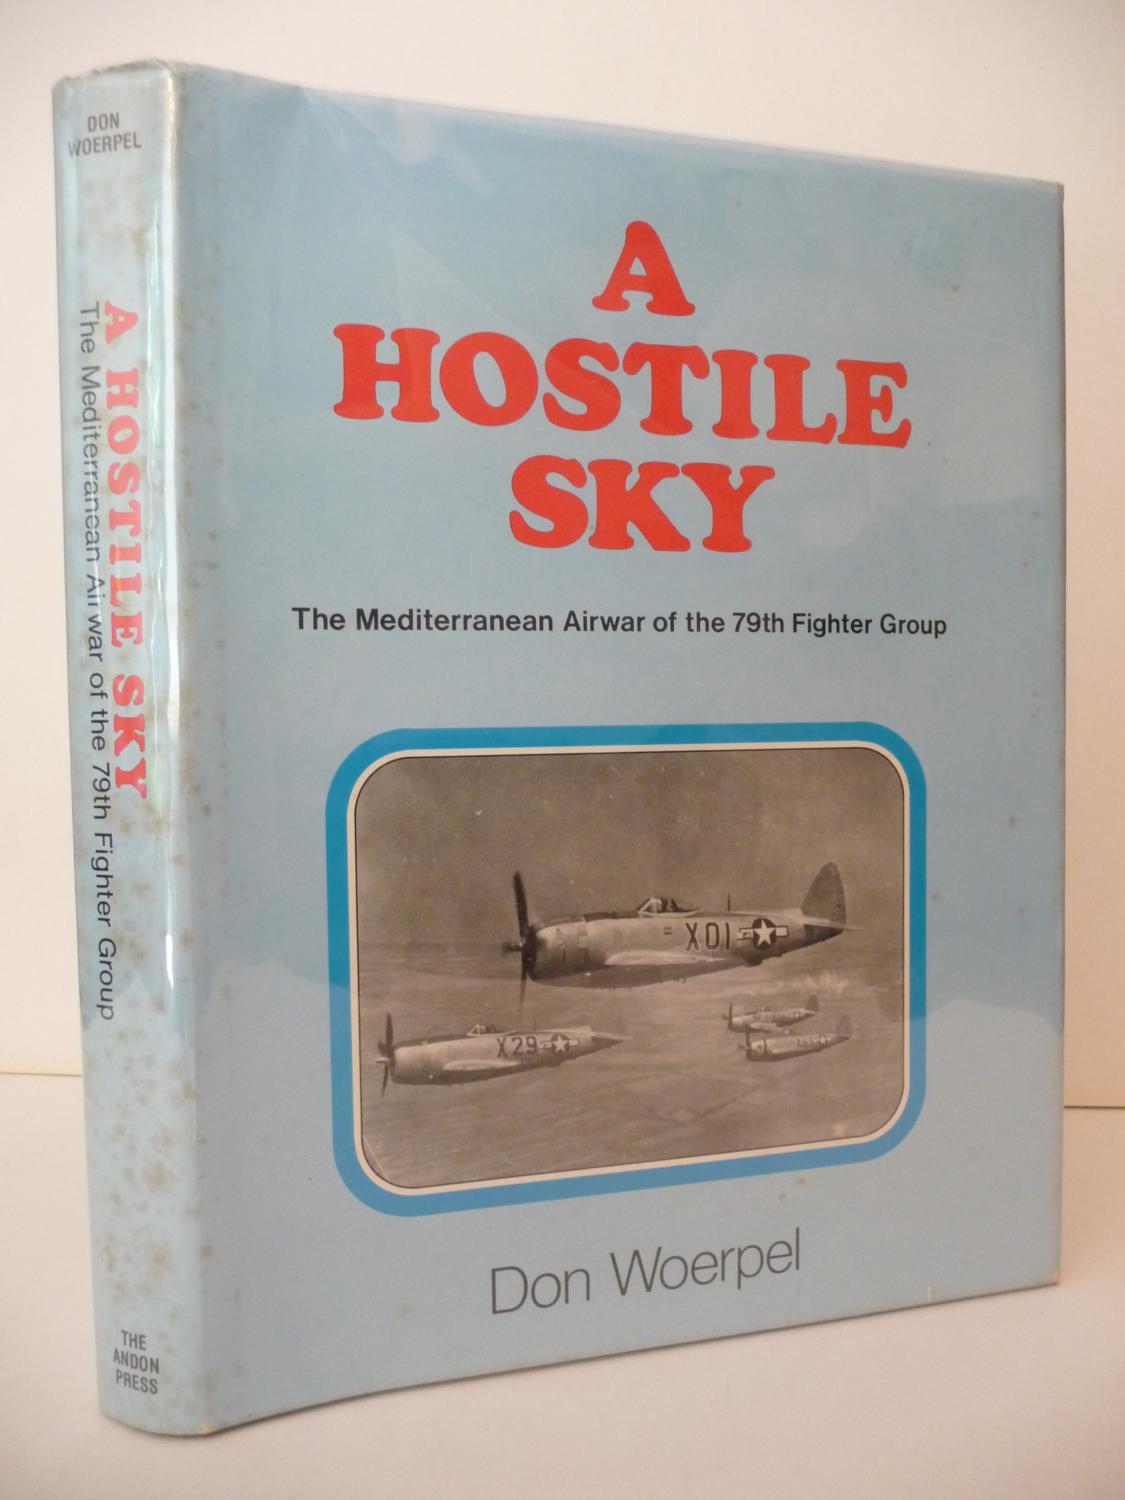 A Hostile Sky: The Mediterranean Airwar of the 79th Fighter Group by ...